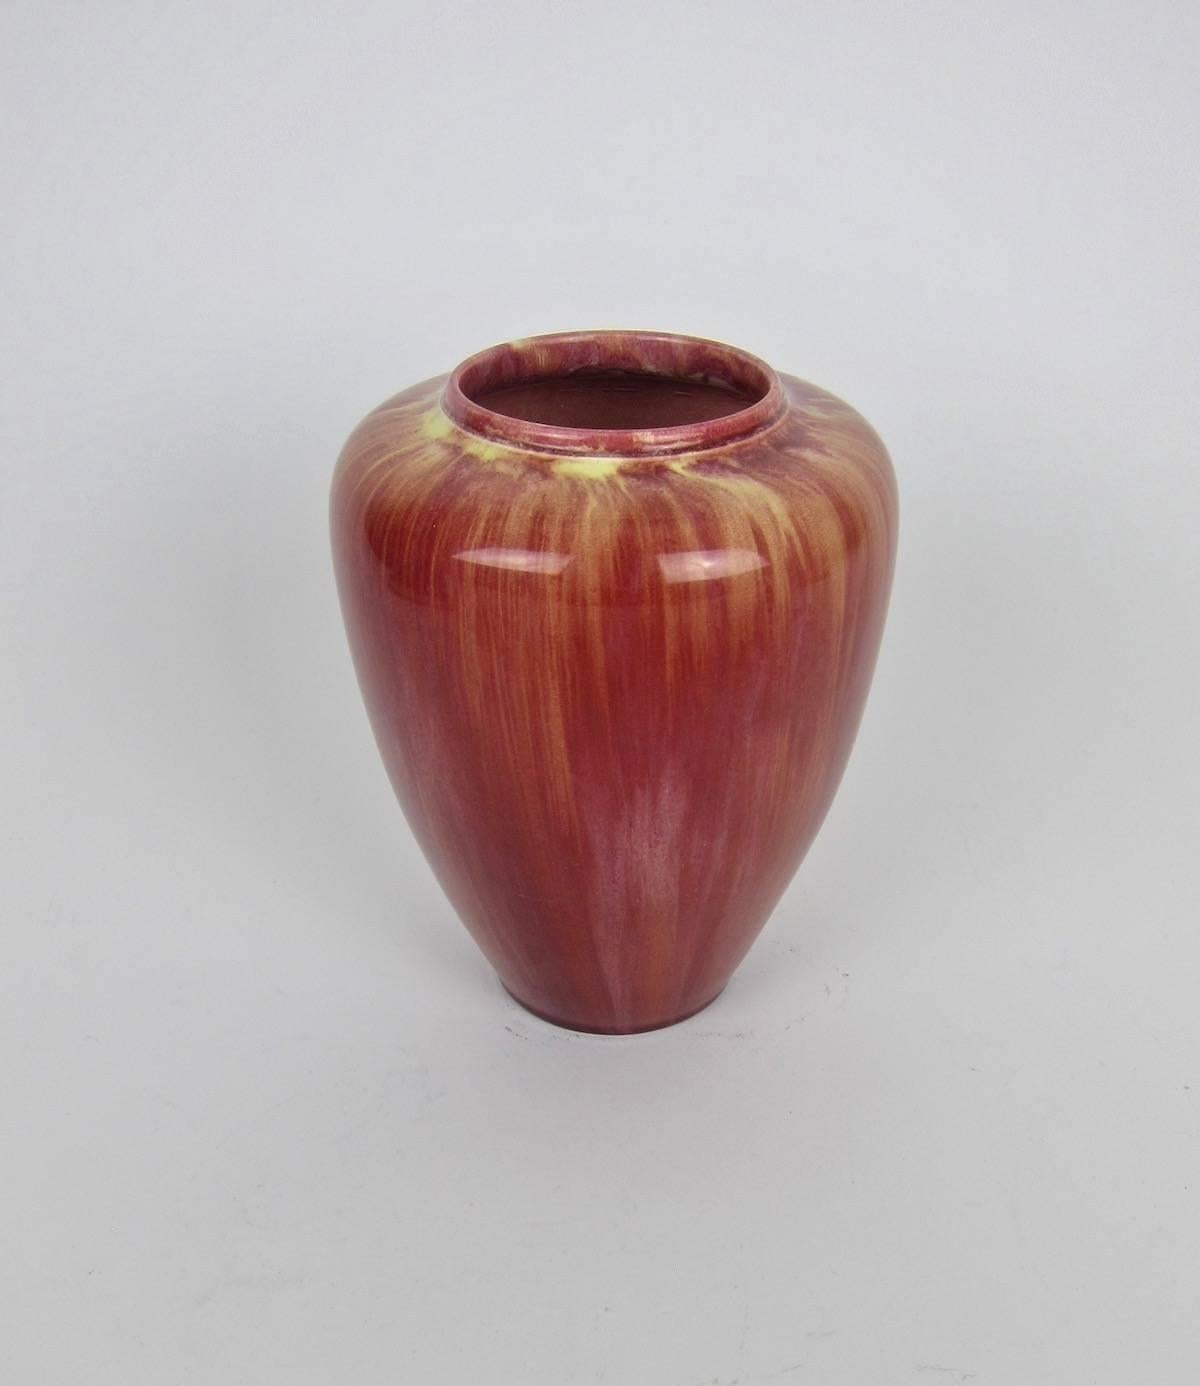 An English Arts & Crafts era earthenware vase from Pilkington's Tile and Pottery Company of Clifton Junction, Manchester, marked 1907. The antique art pottery vessel has a depressed shoulder and wide mouth enveloped in a glossy flambe glaze of